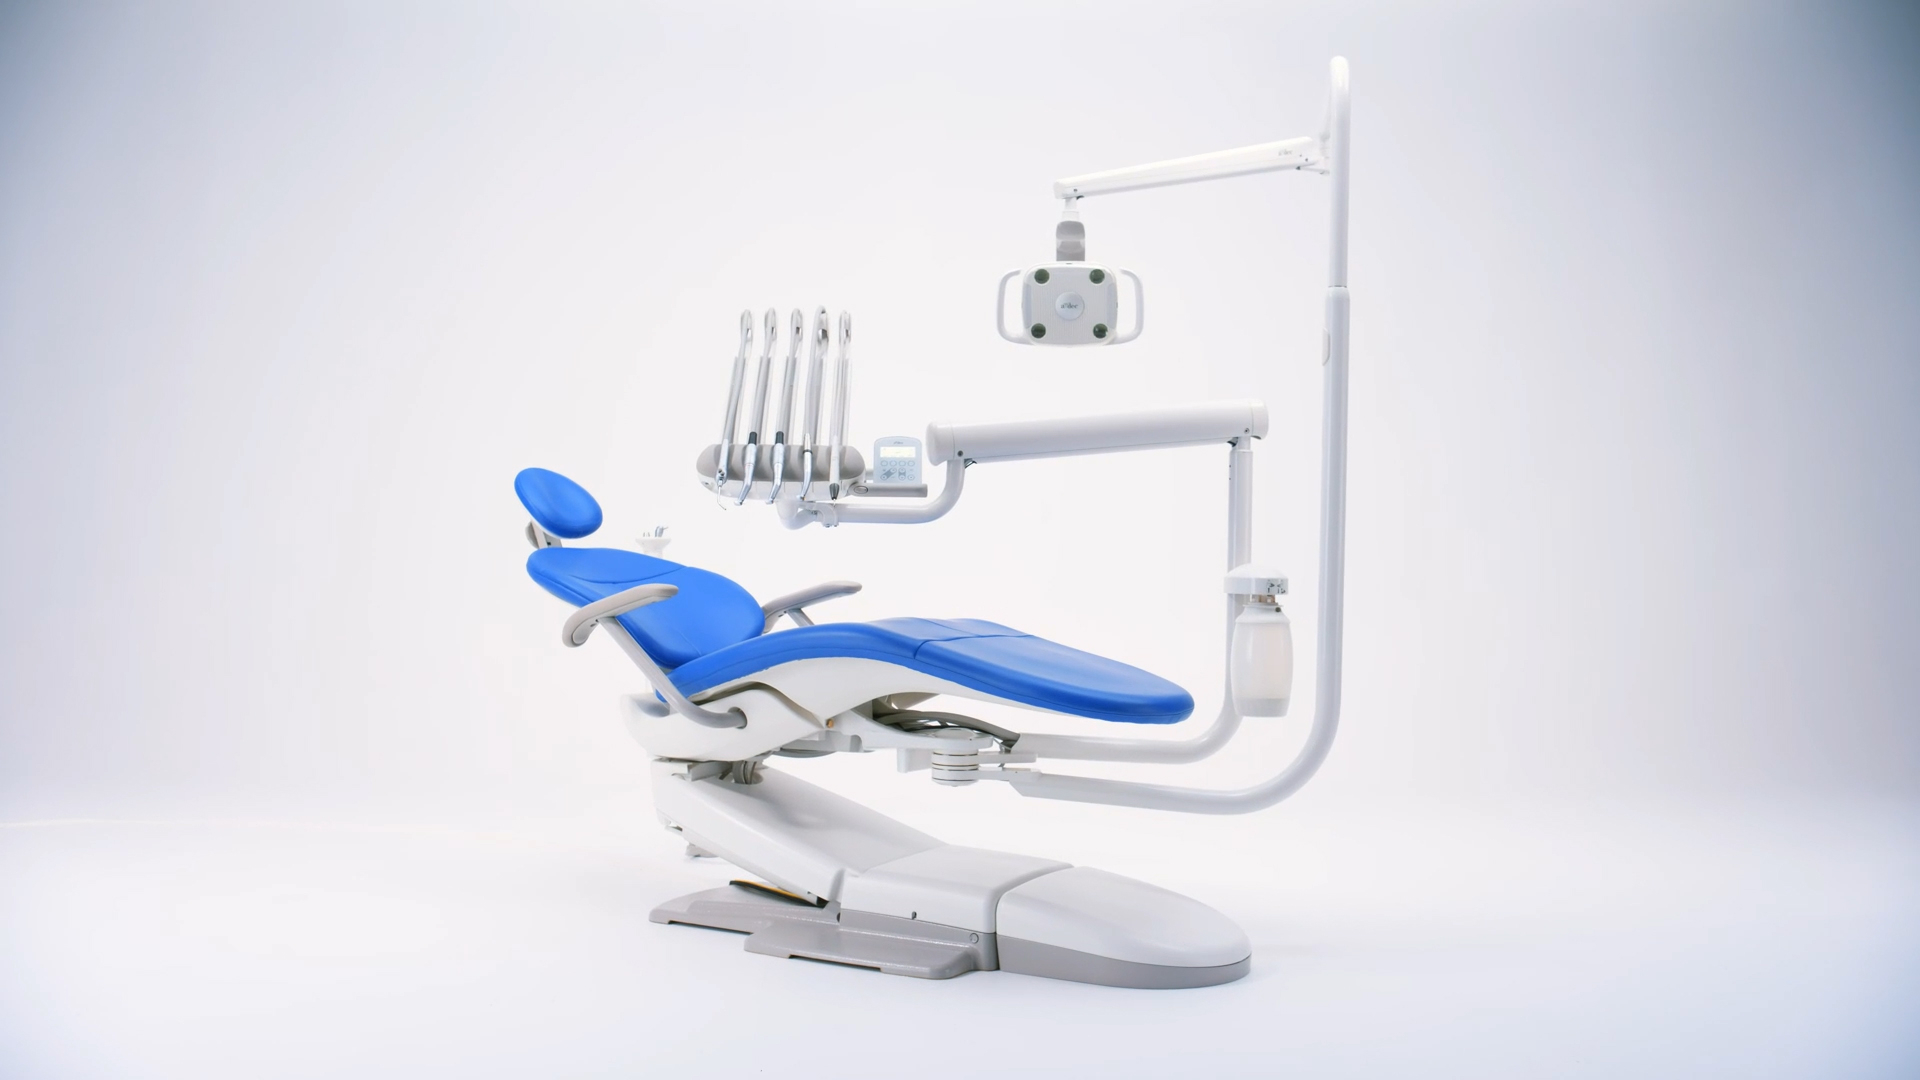 Compact and comfortable, the A-dec 300 dental chair pairs with the new A-dec Pro delivery for a system that can grow with you. Choose the configuration that fits today, with the flexibility to upgrade tomorrow. Add the A-dec+ Gateway to access A-dec+ software, a digital foundation for integrating the latest clinical products and future technologies. Learn more at a-dec.com/300